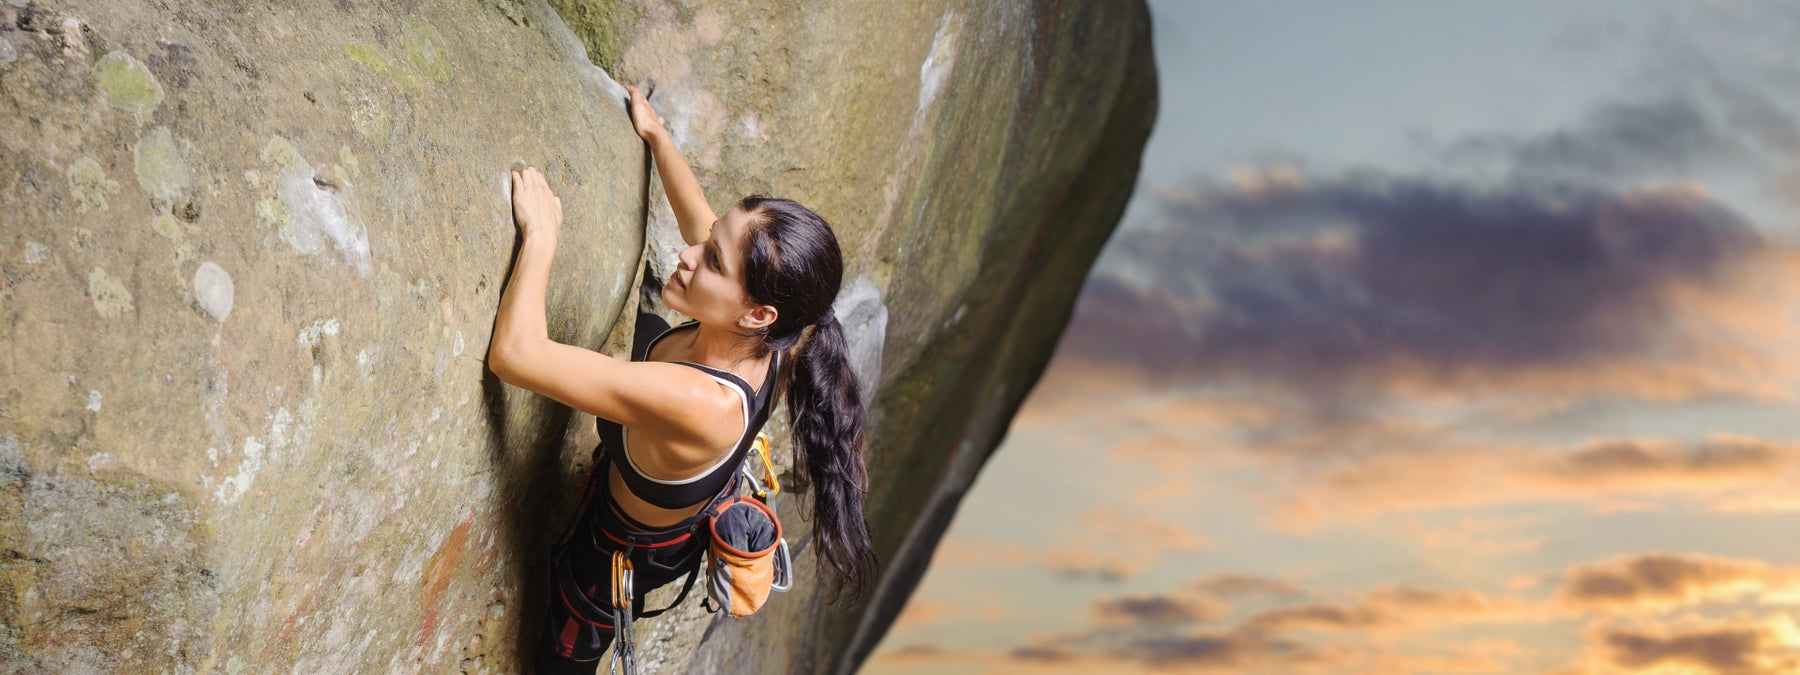 Rock Climbing - What to Know Before You Start